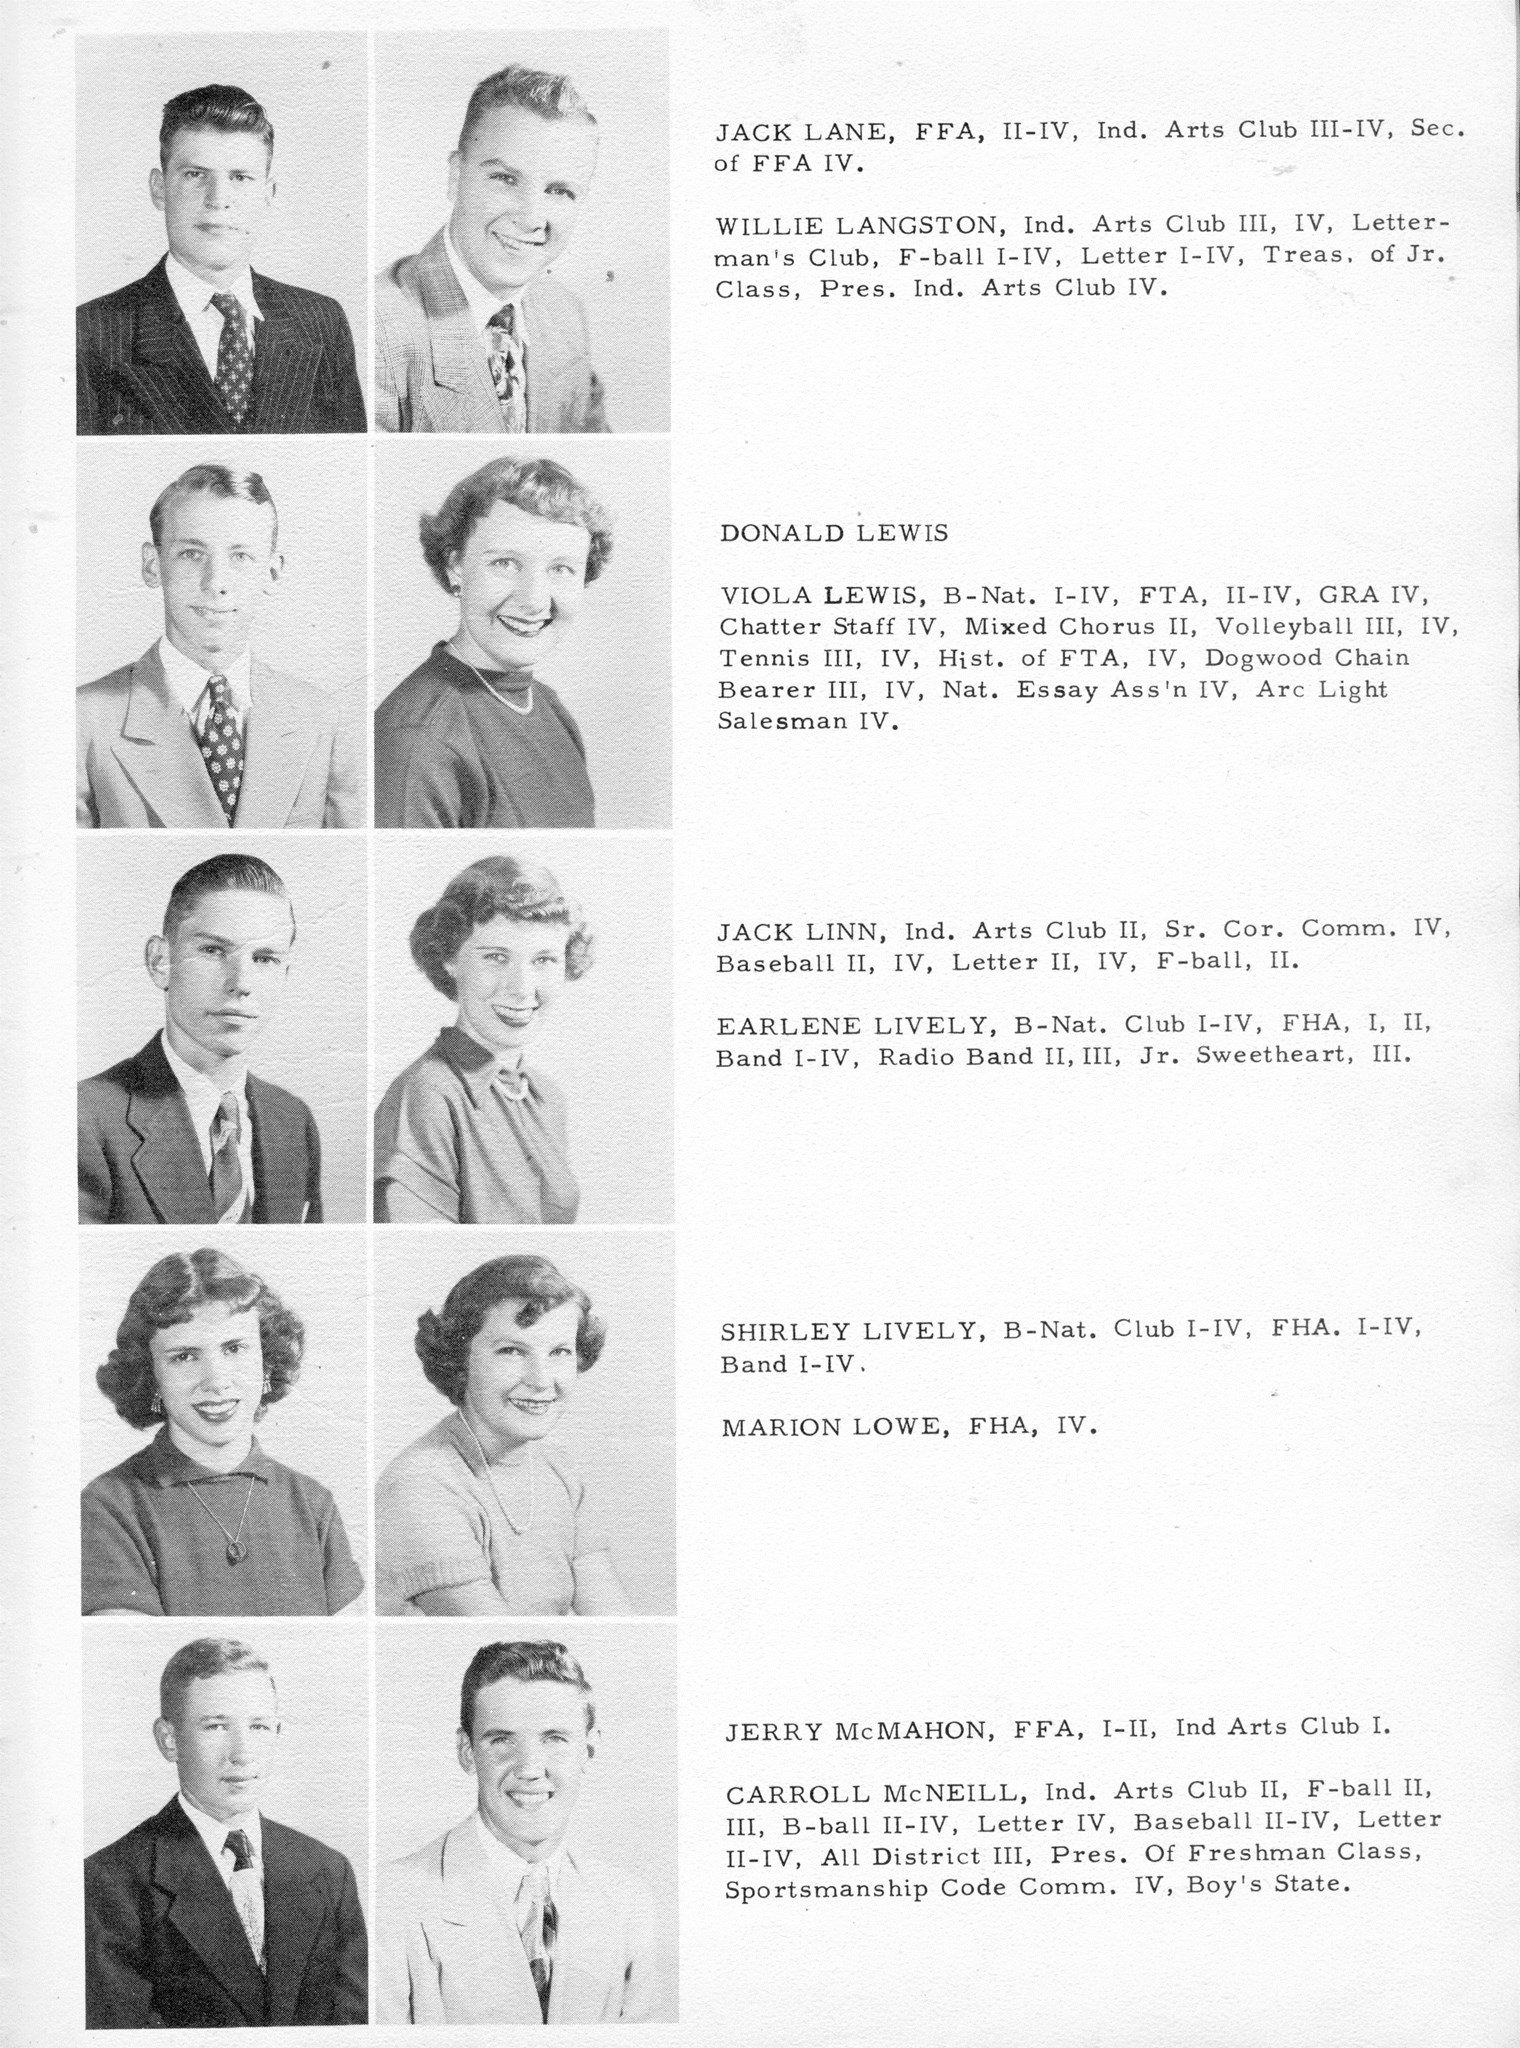 ../../../Images/Large/1952/Arclight-1952-pg0019.jpg